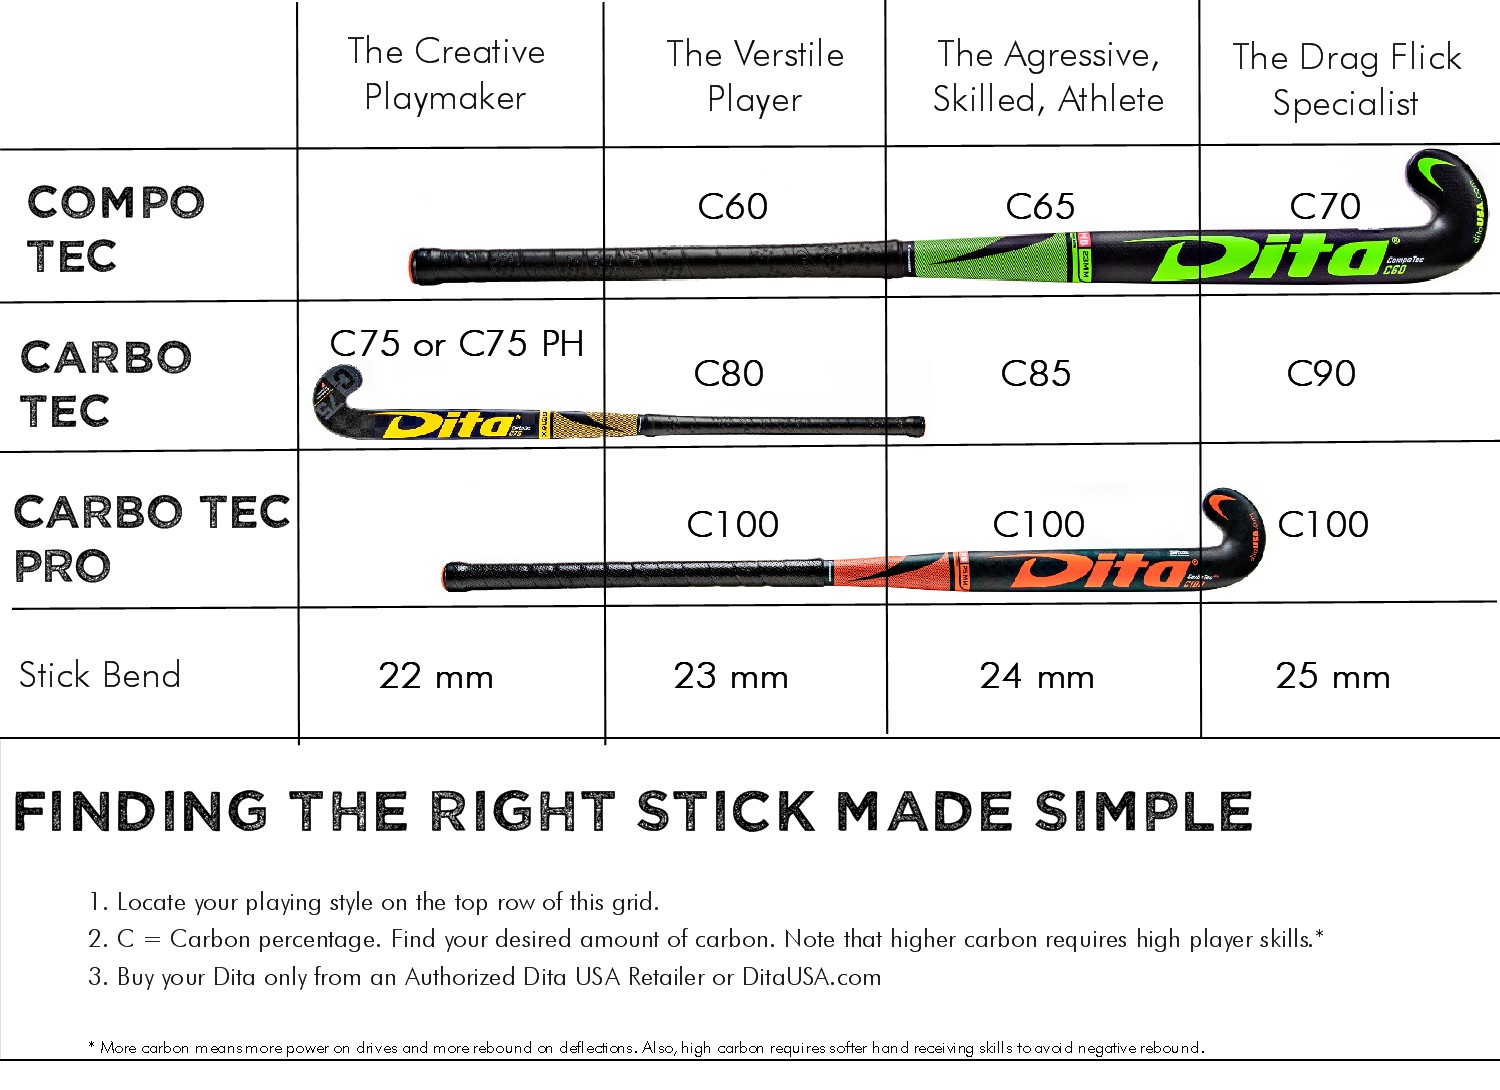 Original Hockey: Field Hockey Sticks - Find the Right Stick for Your